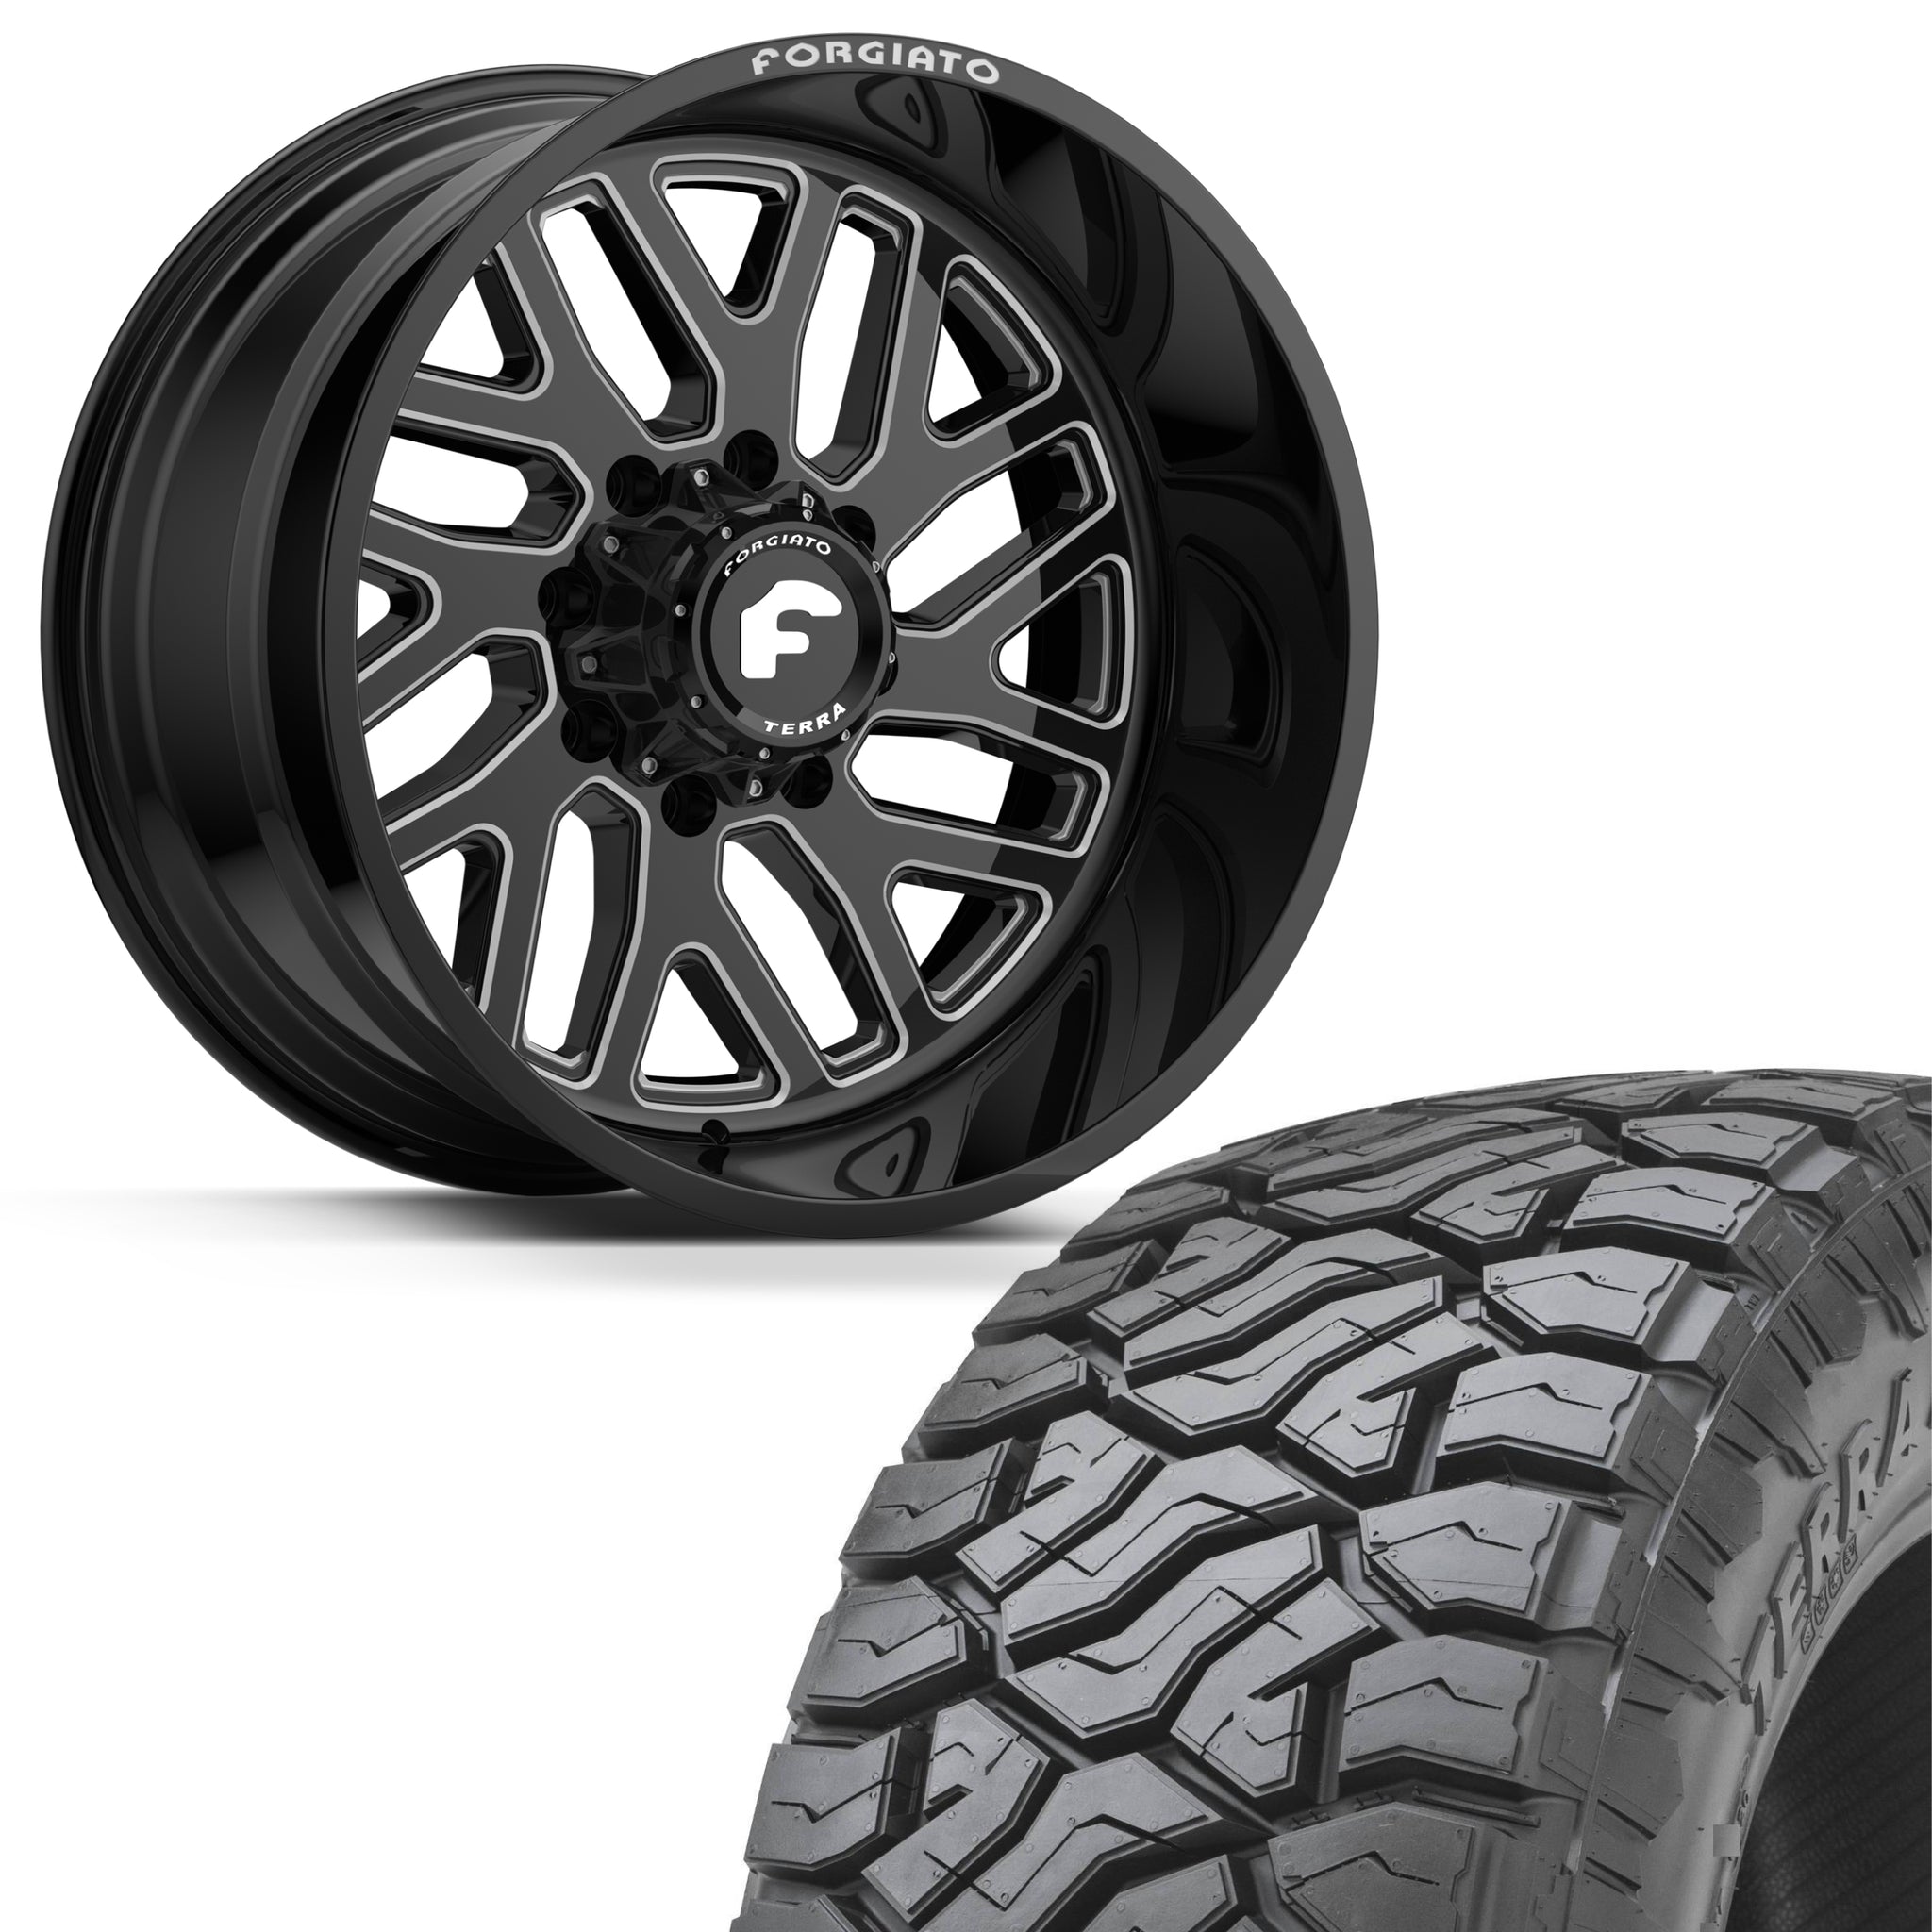 FORGIATO FLOW TERRA 004 24x12 6x139.7(6x5.5) -44 OFFROAD BLACK/MILLED (Wheel and Tire Package)